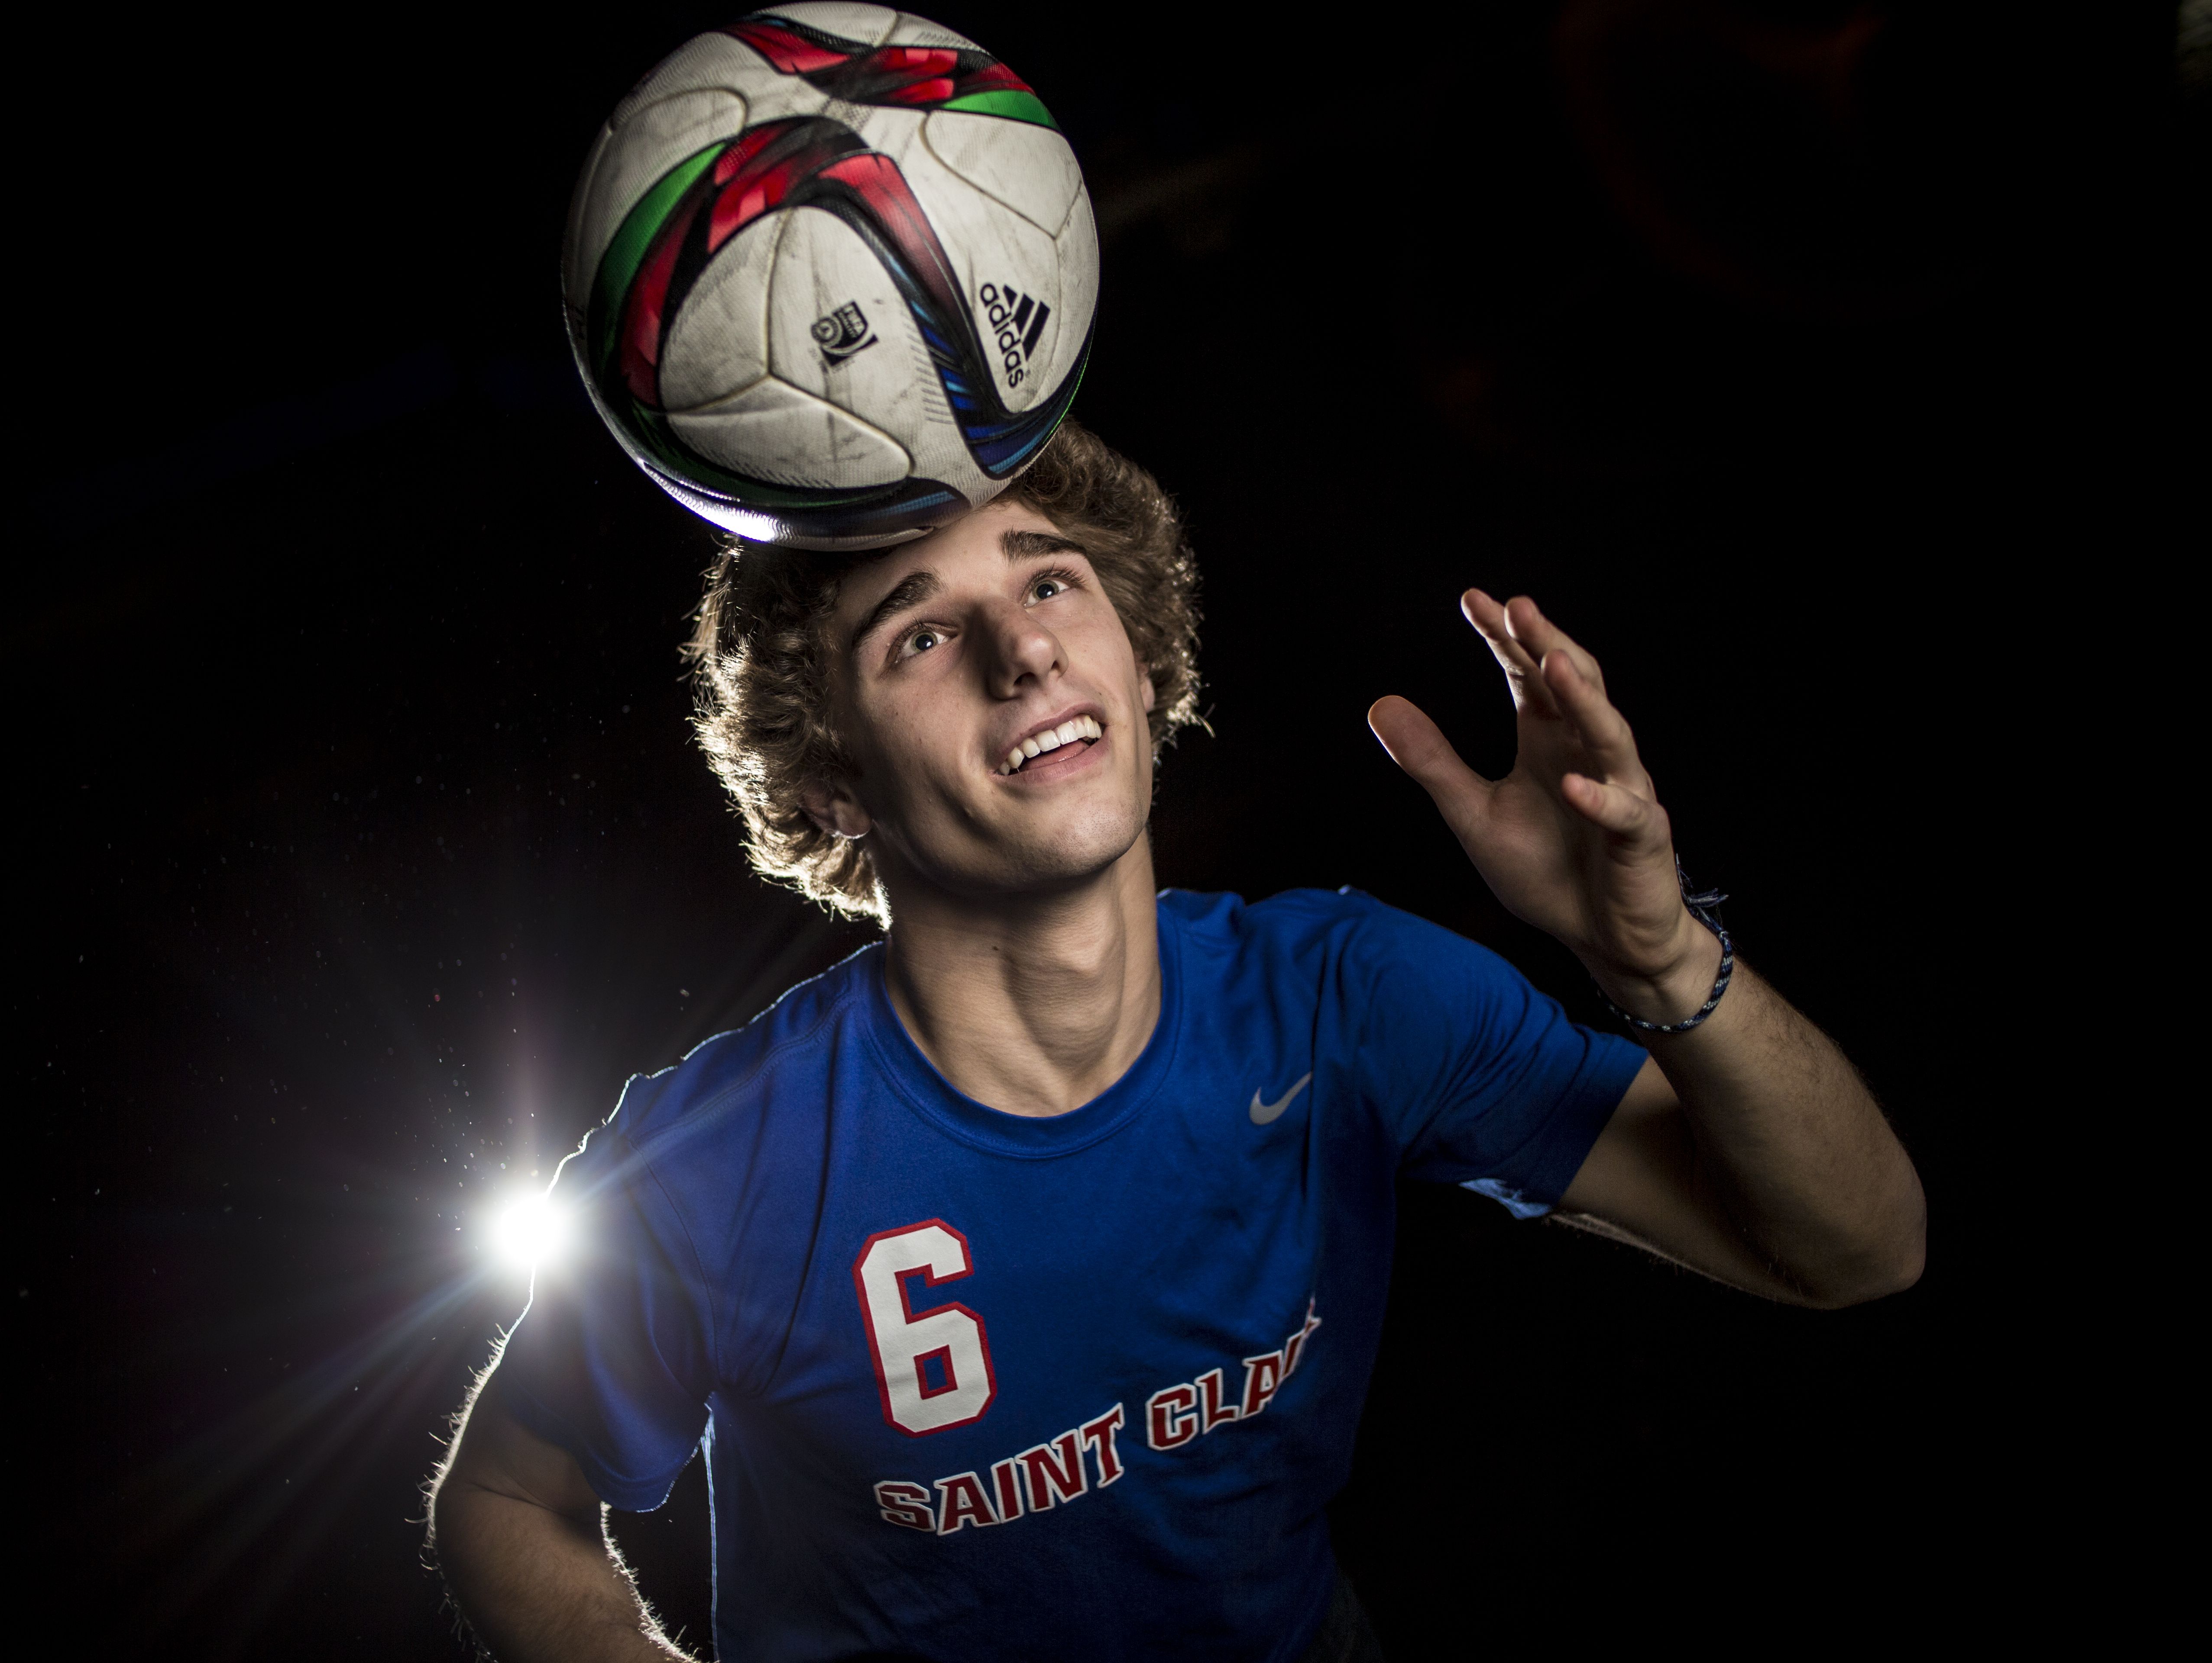 St. Clair High School senior Ben Al-Gharabally is the Times Herald Soccer Player of the Year.